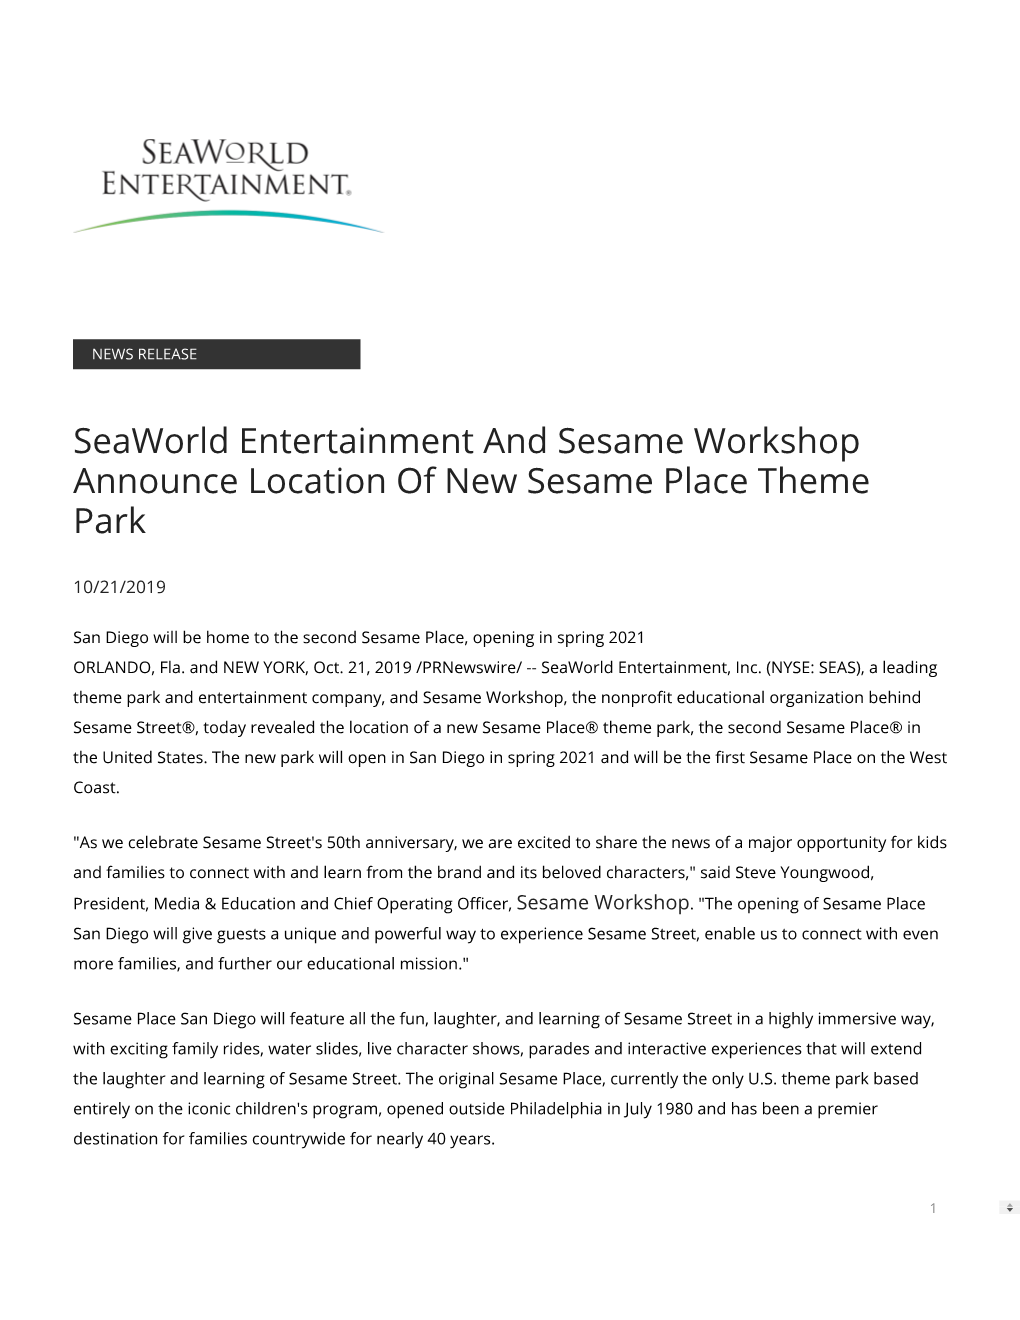 Seaworld Entertainment and Sesame Workshop Announce Location of New Sesame Place Theme Park